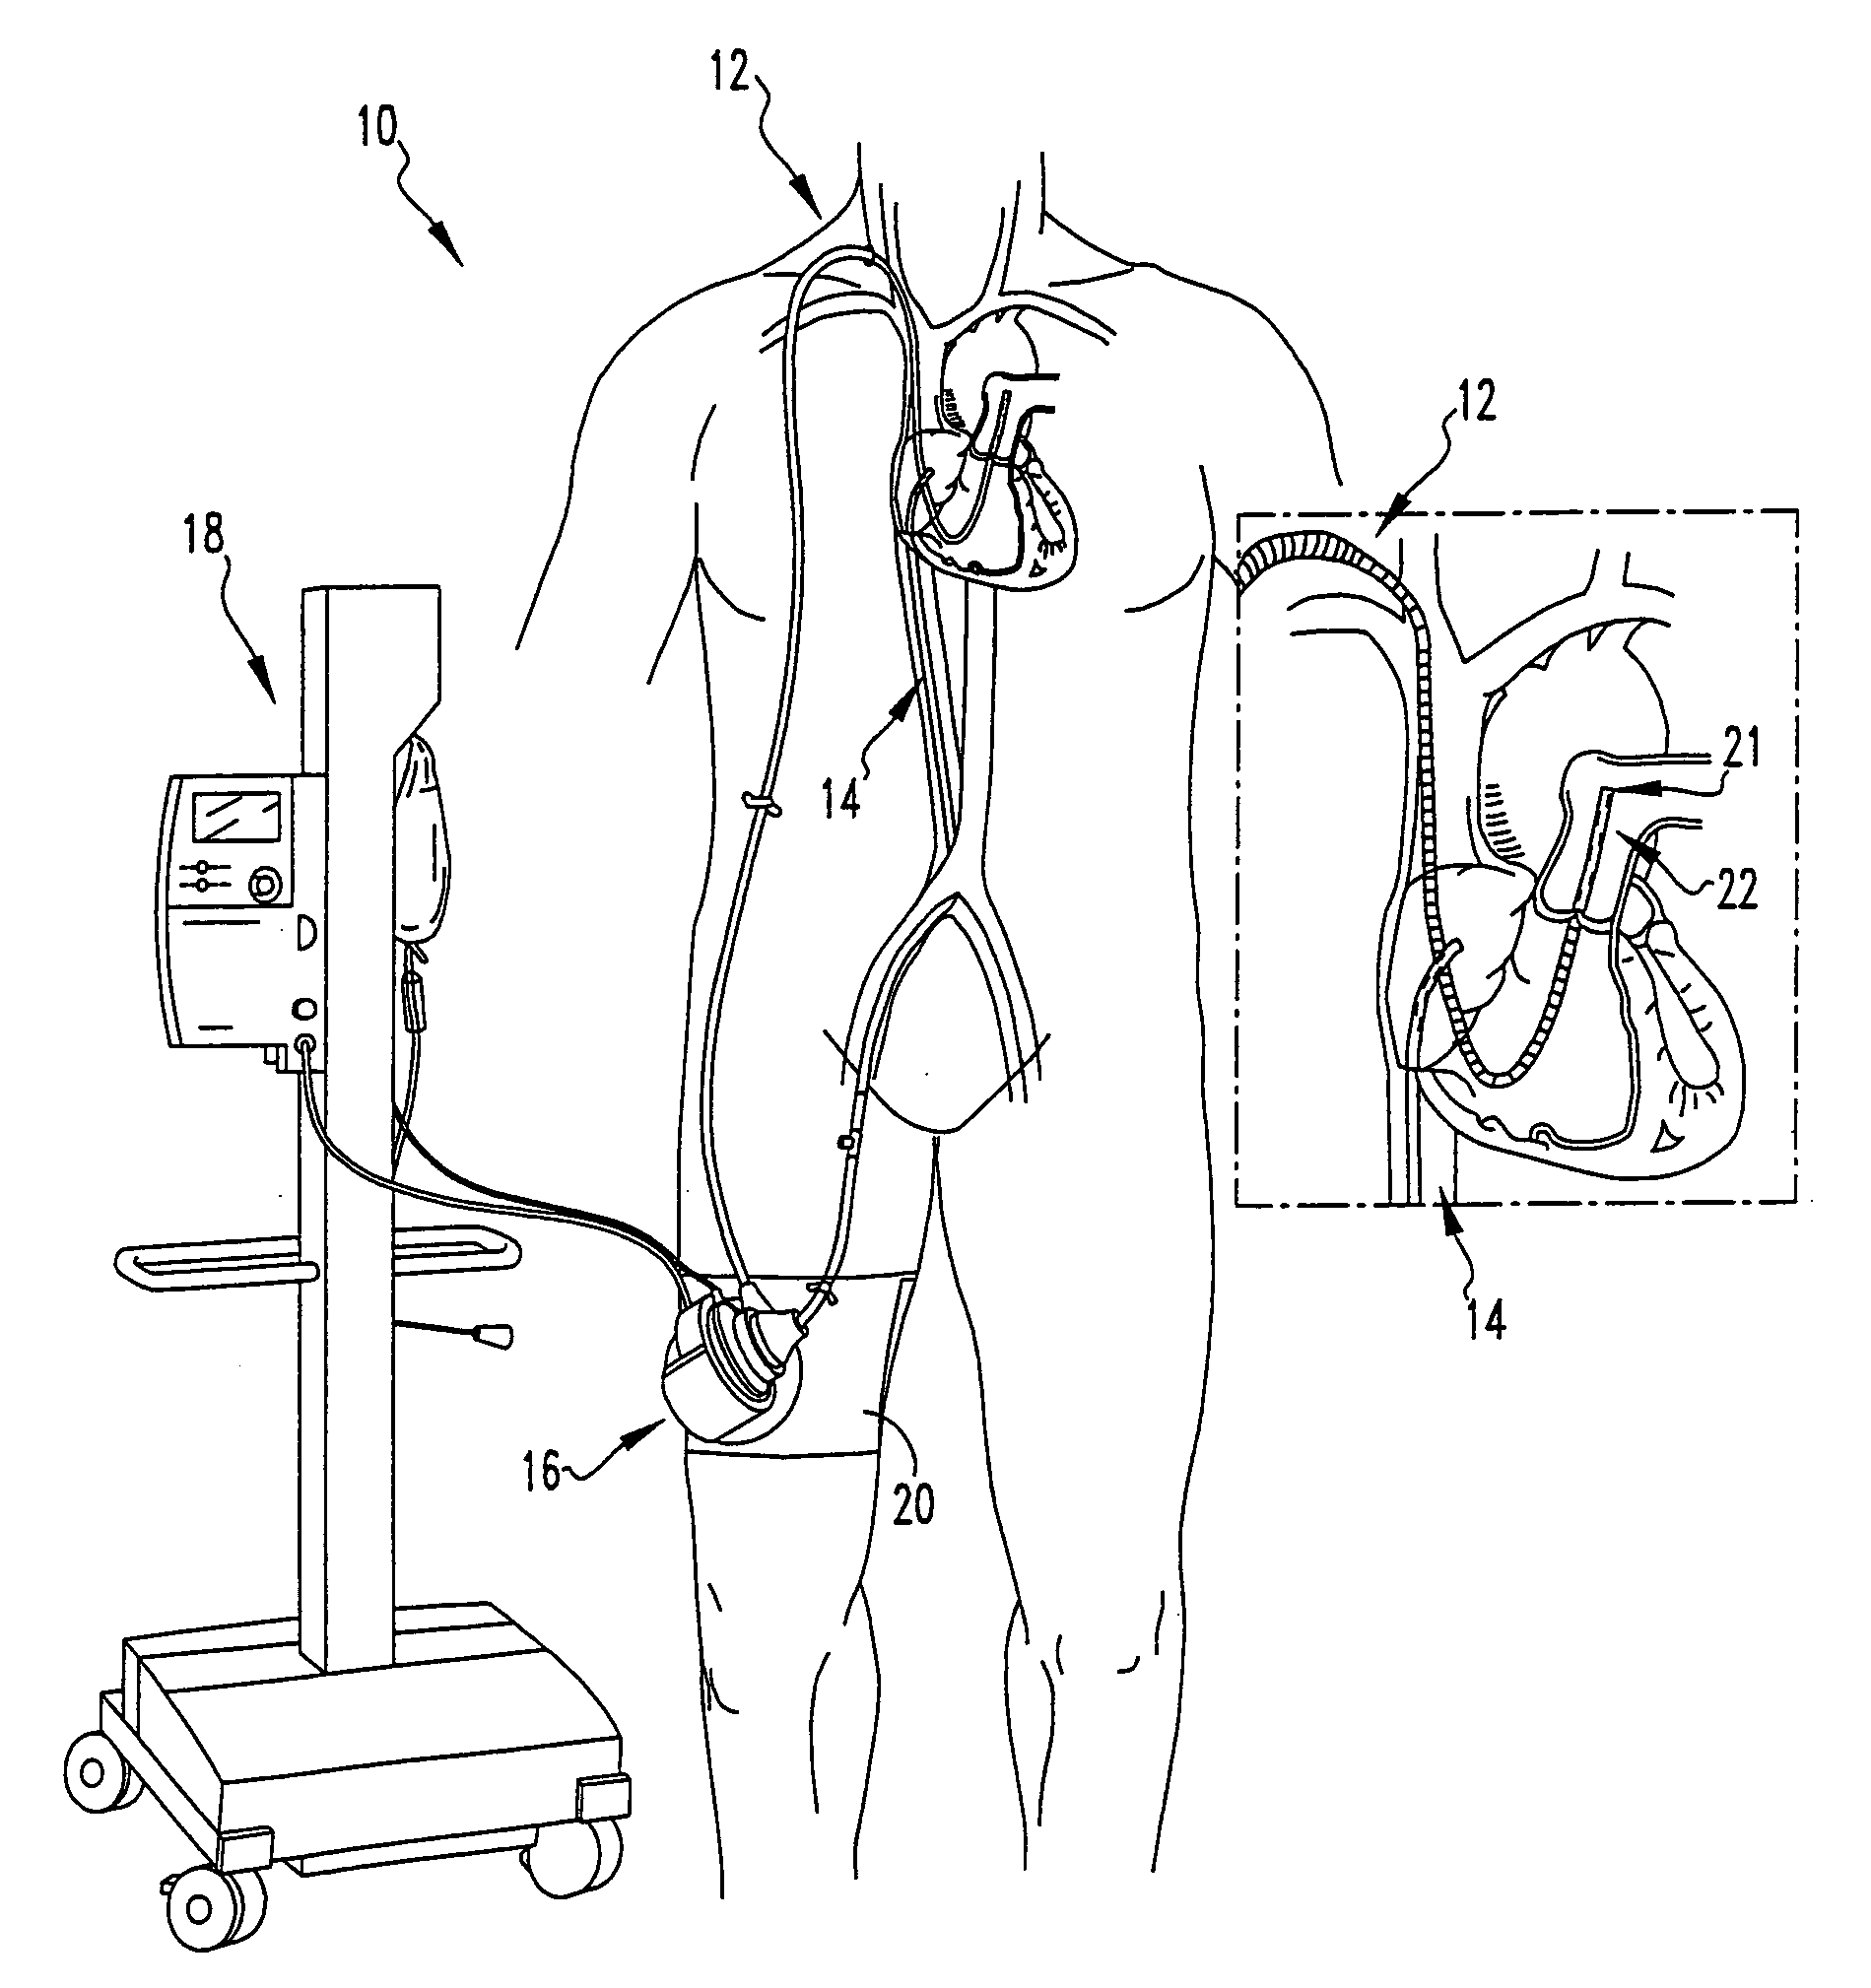 Percutaneous right ventricular assist apparatus and method